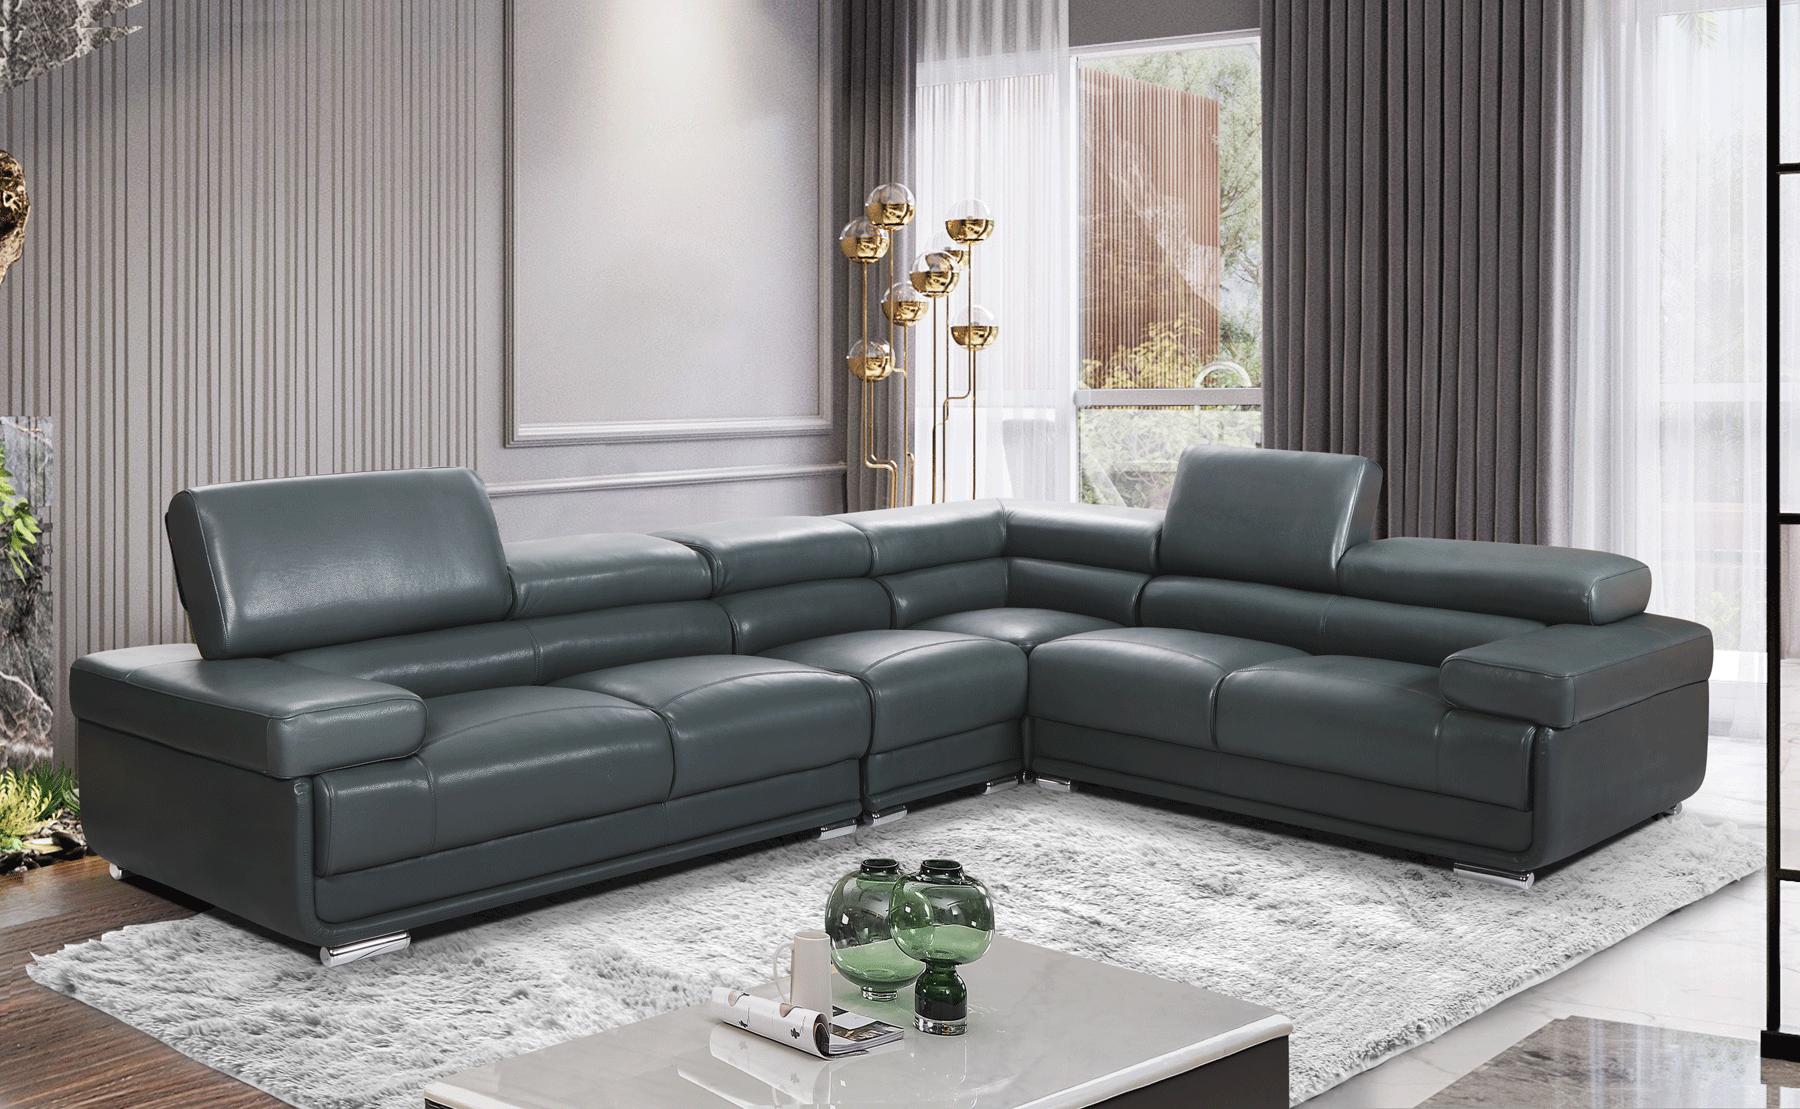 Contemporary, Modern Sectional Sofa 2119 Sectional 2119SECTIONALDARKGRE in Dark Grey Genuine Leather